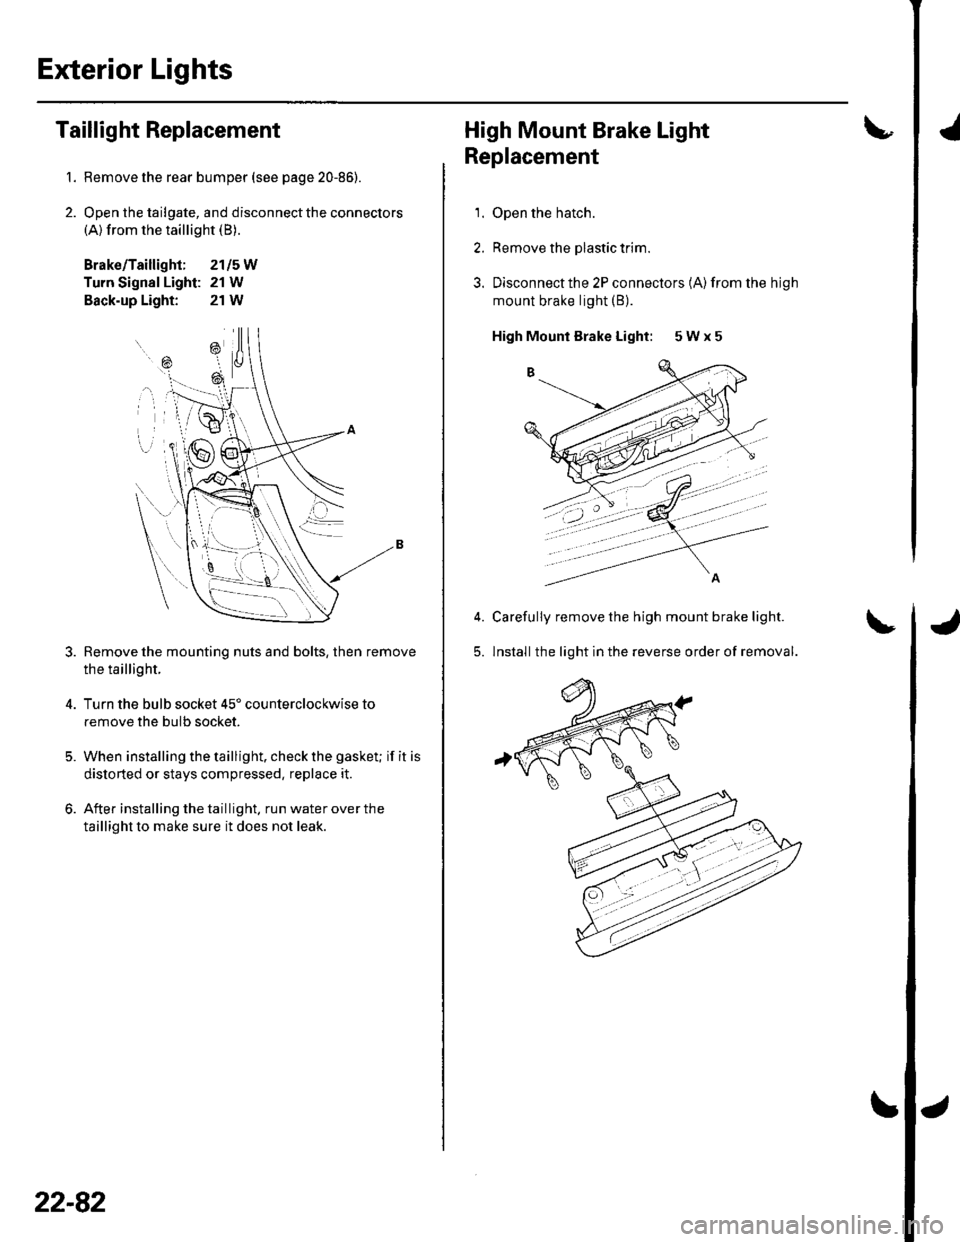 HONDA CIVIC 2003 7.G Workshop Manual Exterior Lights
1.
2.
Taillight Replacement
Remove the rear bumper (see page 20-86).
Open the tailgate, and disconnect the connectors(A) from the taillight (B).
Brako/Taillight; 2115W
Turn Signal Ligh